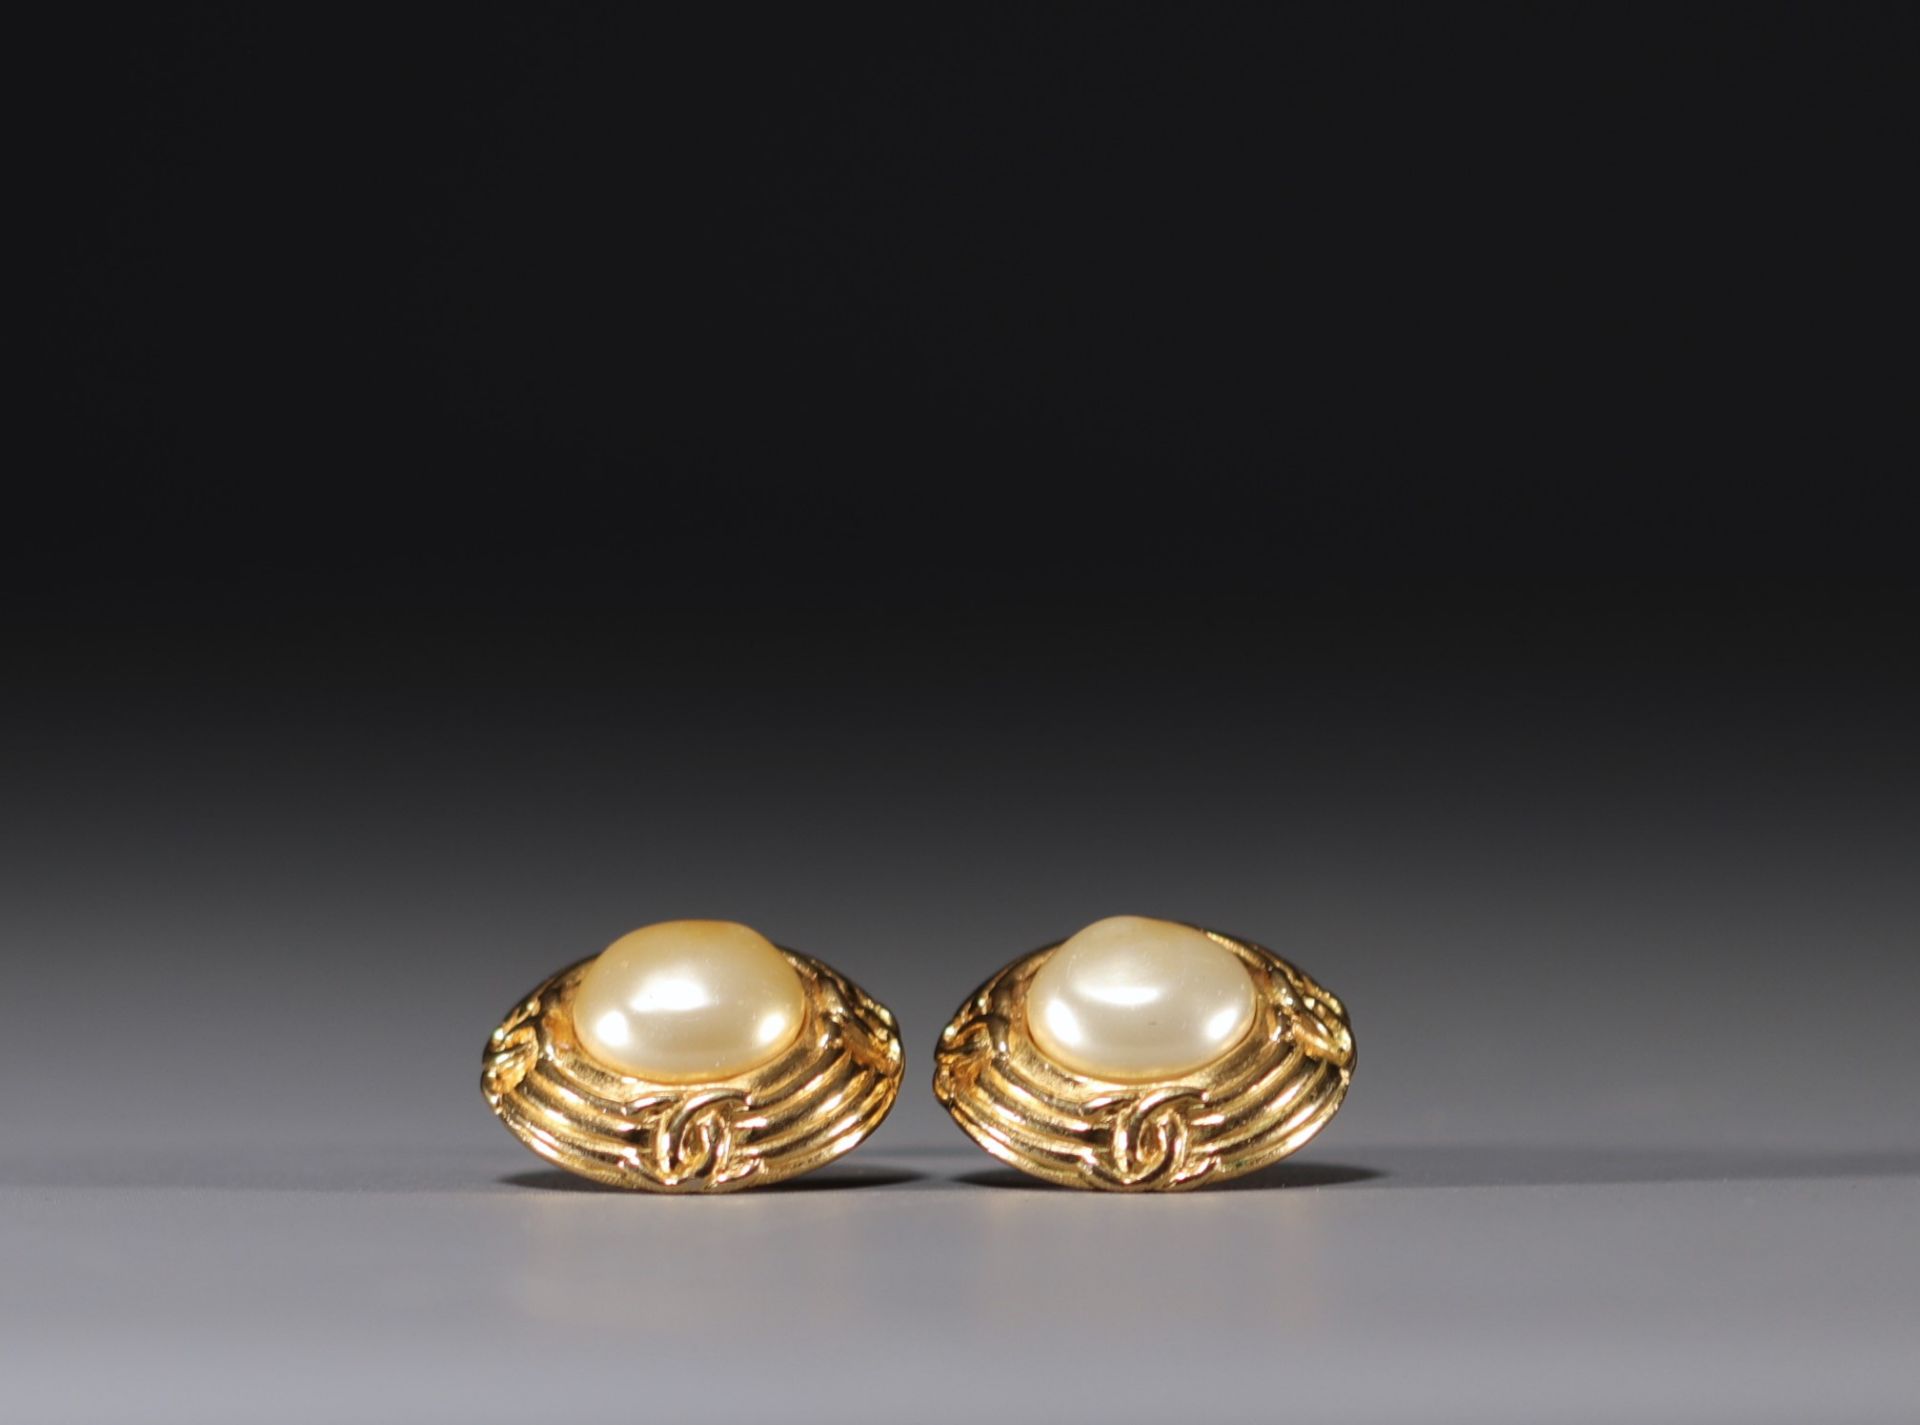 CHANEL - Pair of gold-coloured earrings, mother-of-pearl cabochon. - Image 3 of 3